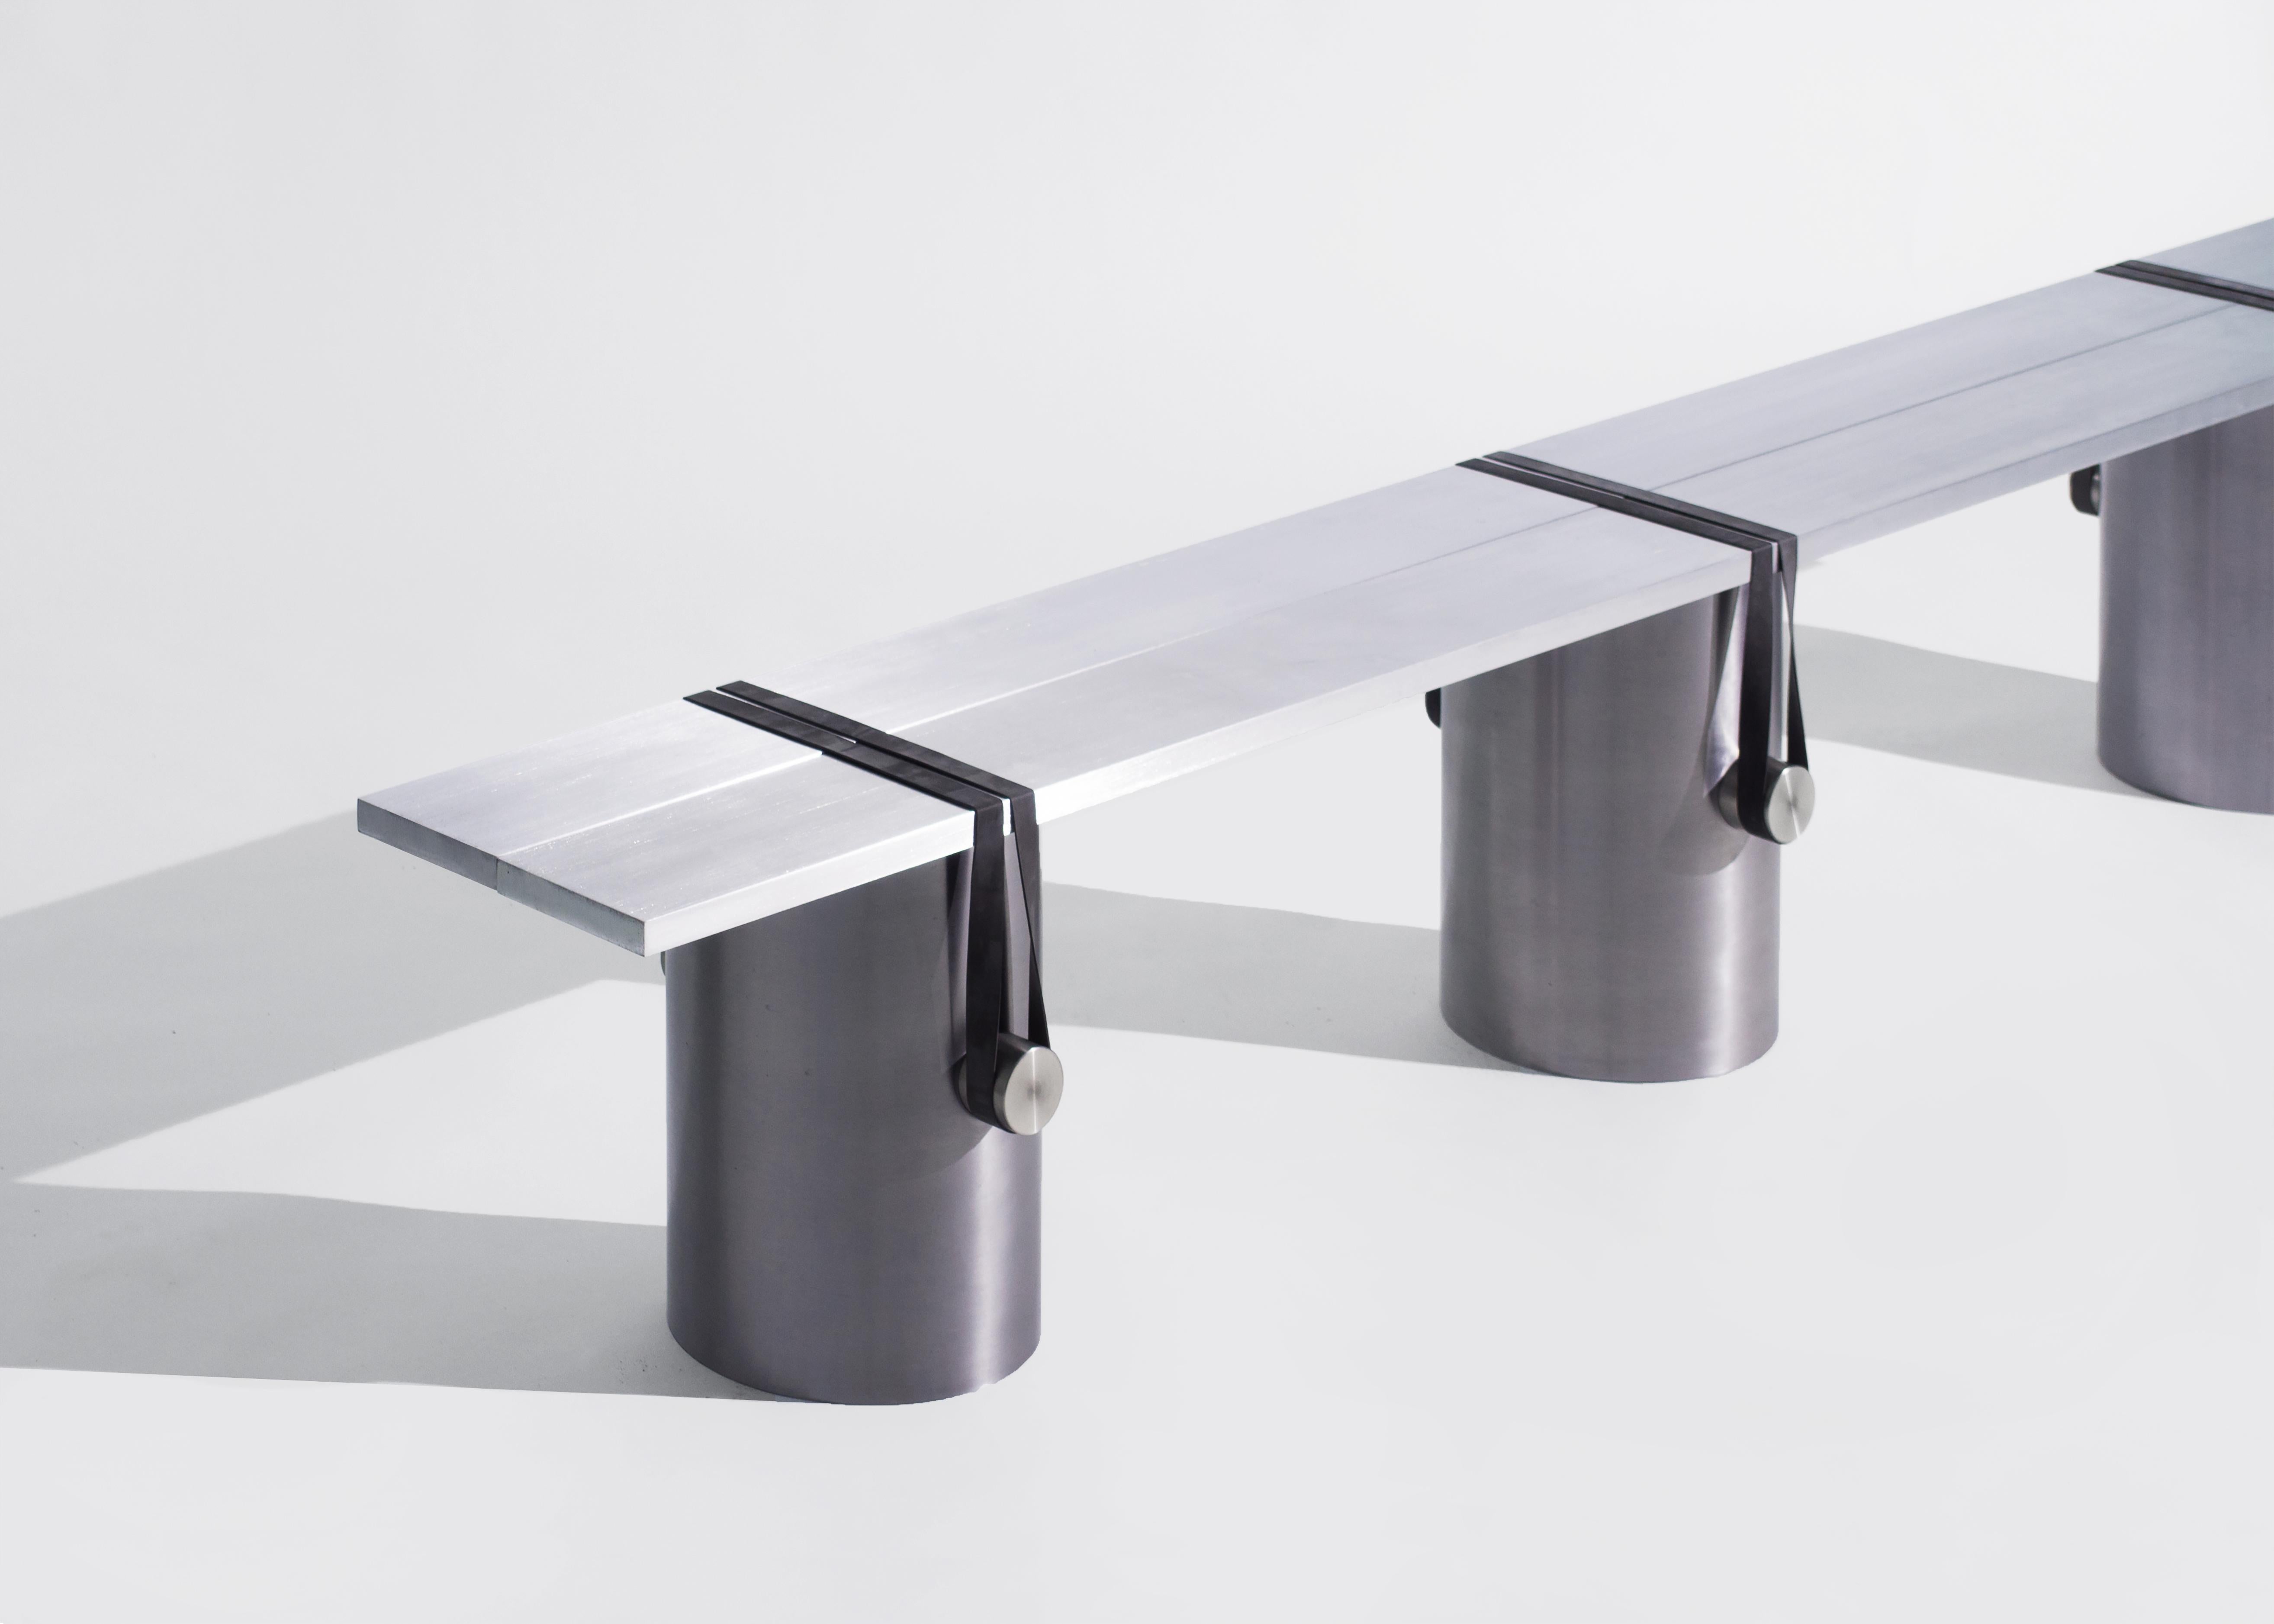 The RB02 bench is composed of two brushed aluminium plates leaning onto three lightly brushed steel tubes; held under tension with polished stainless steel cylinders and black rubber bands. 

This radical assemblage is the result of a continuous